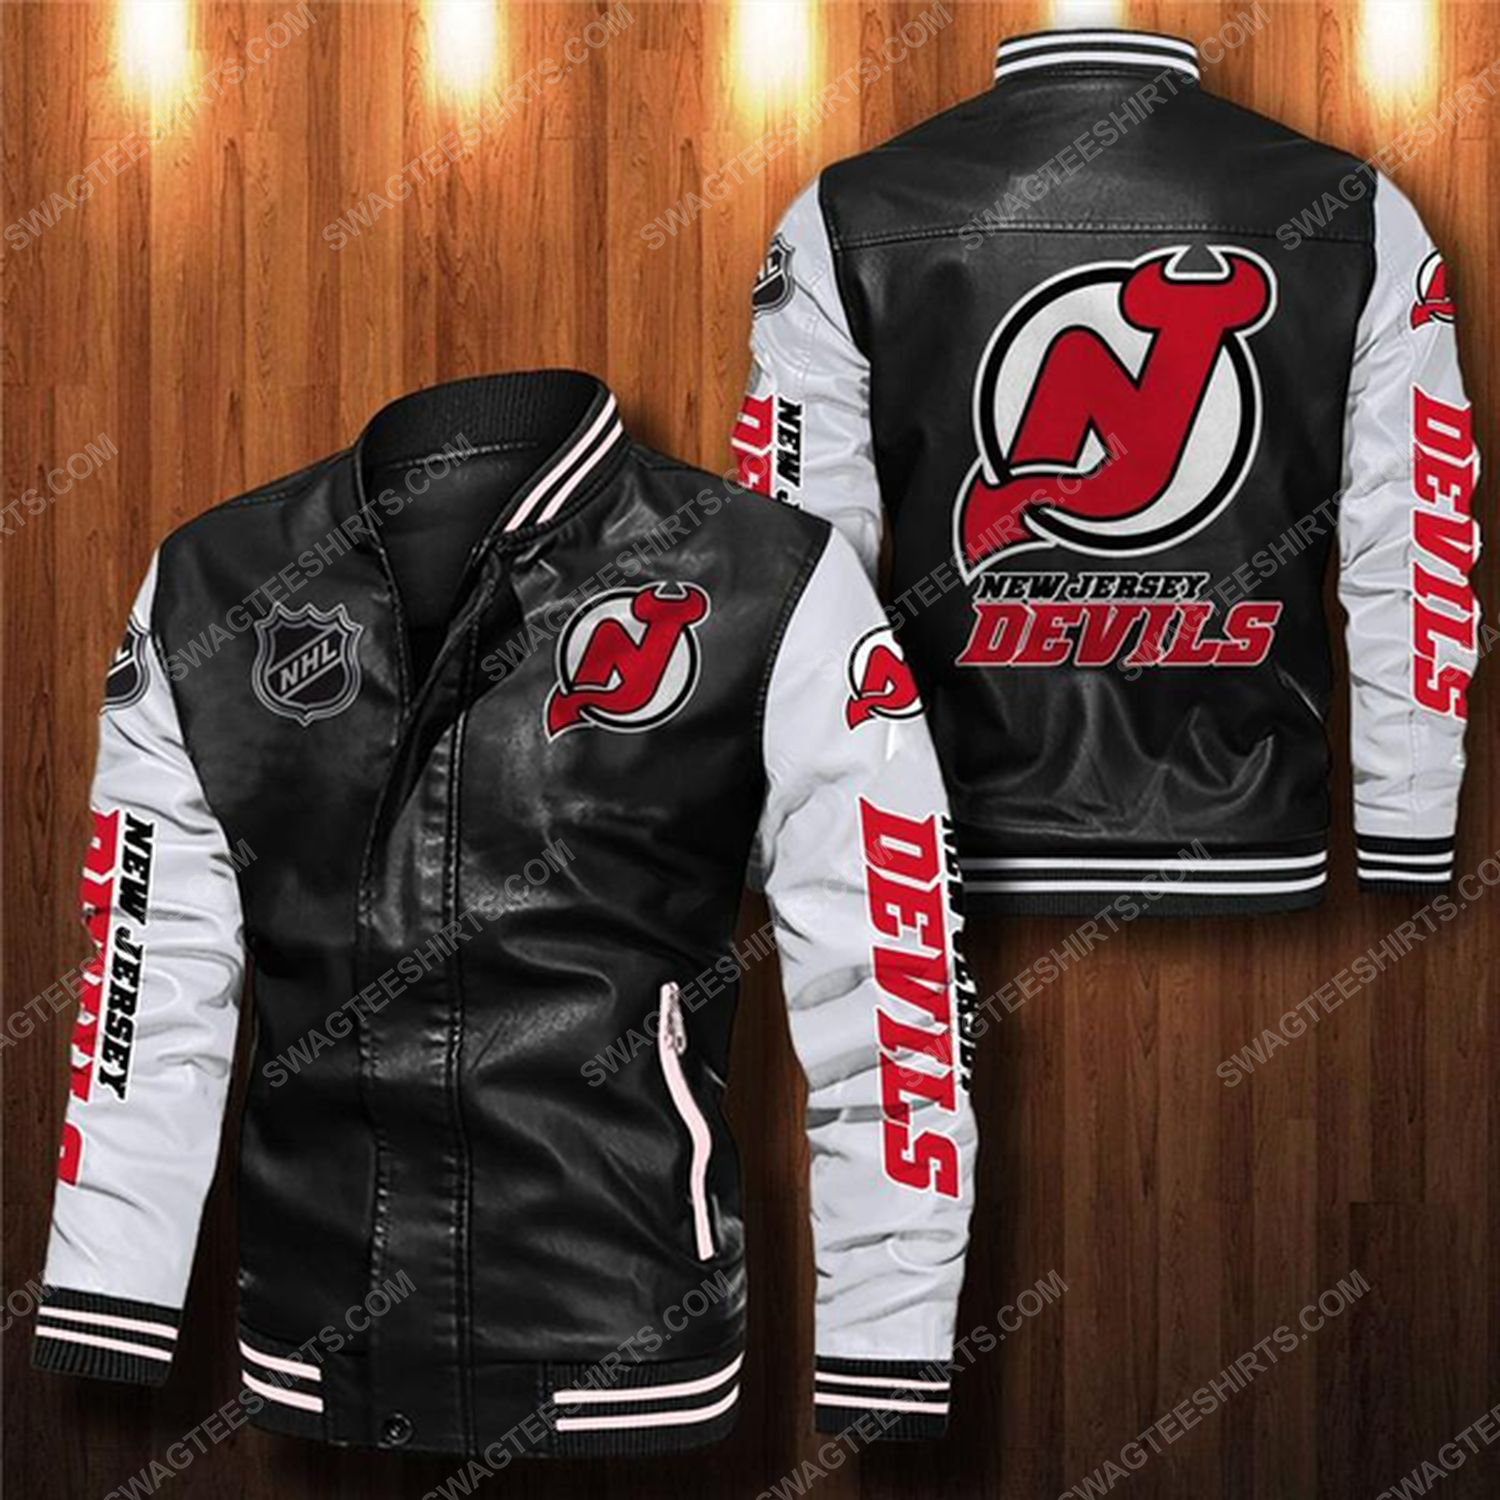 New jersey devils all over print leather bomber jacket - white